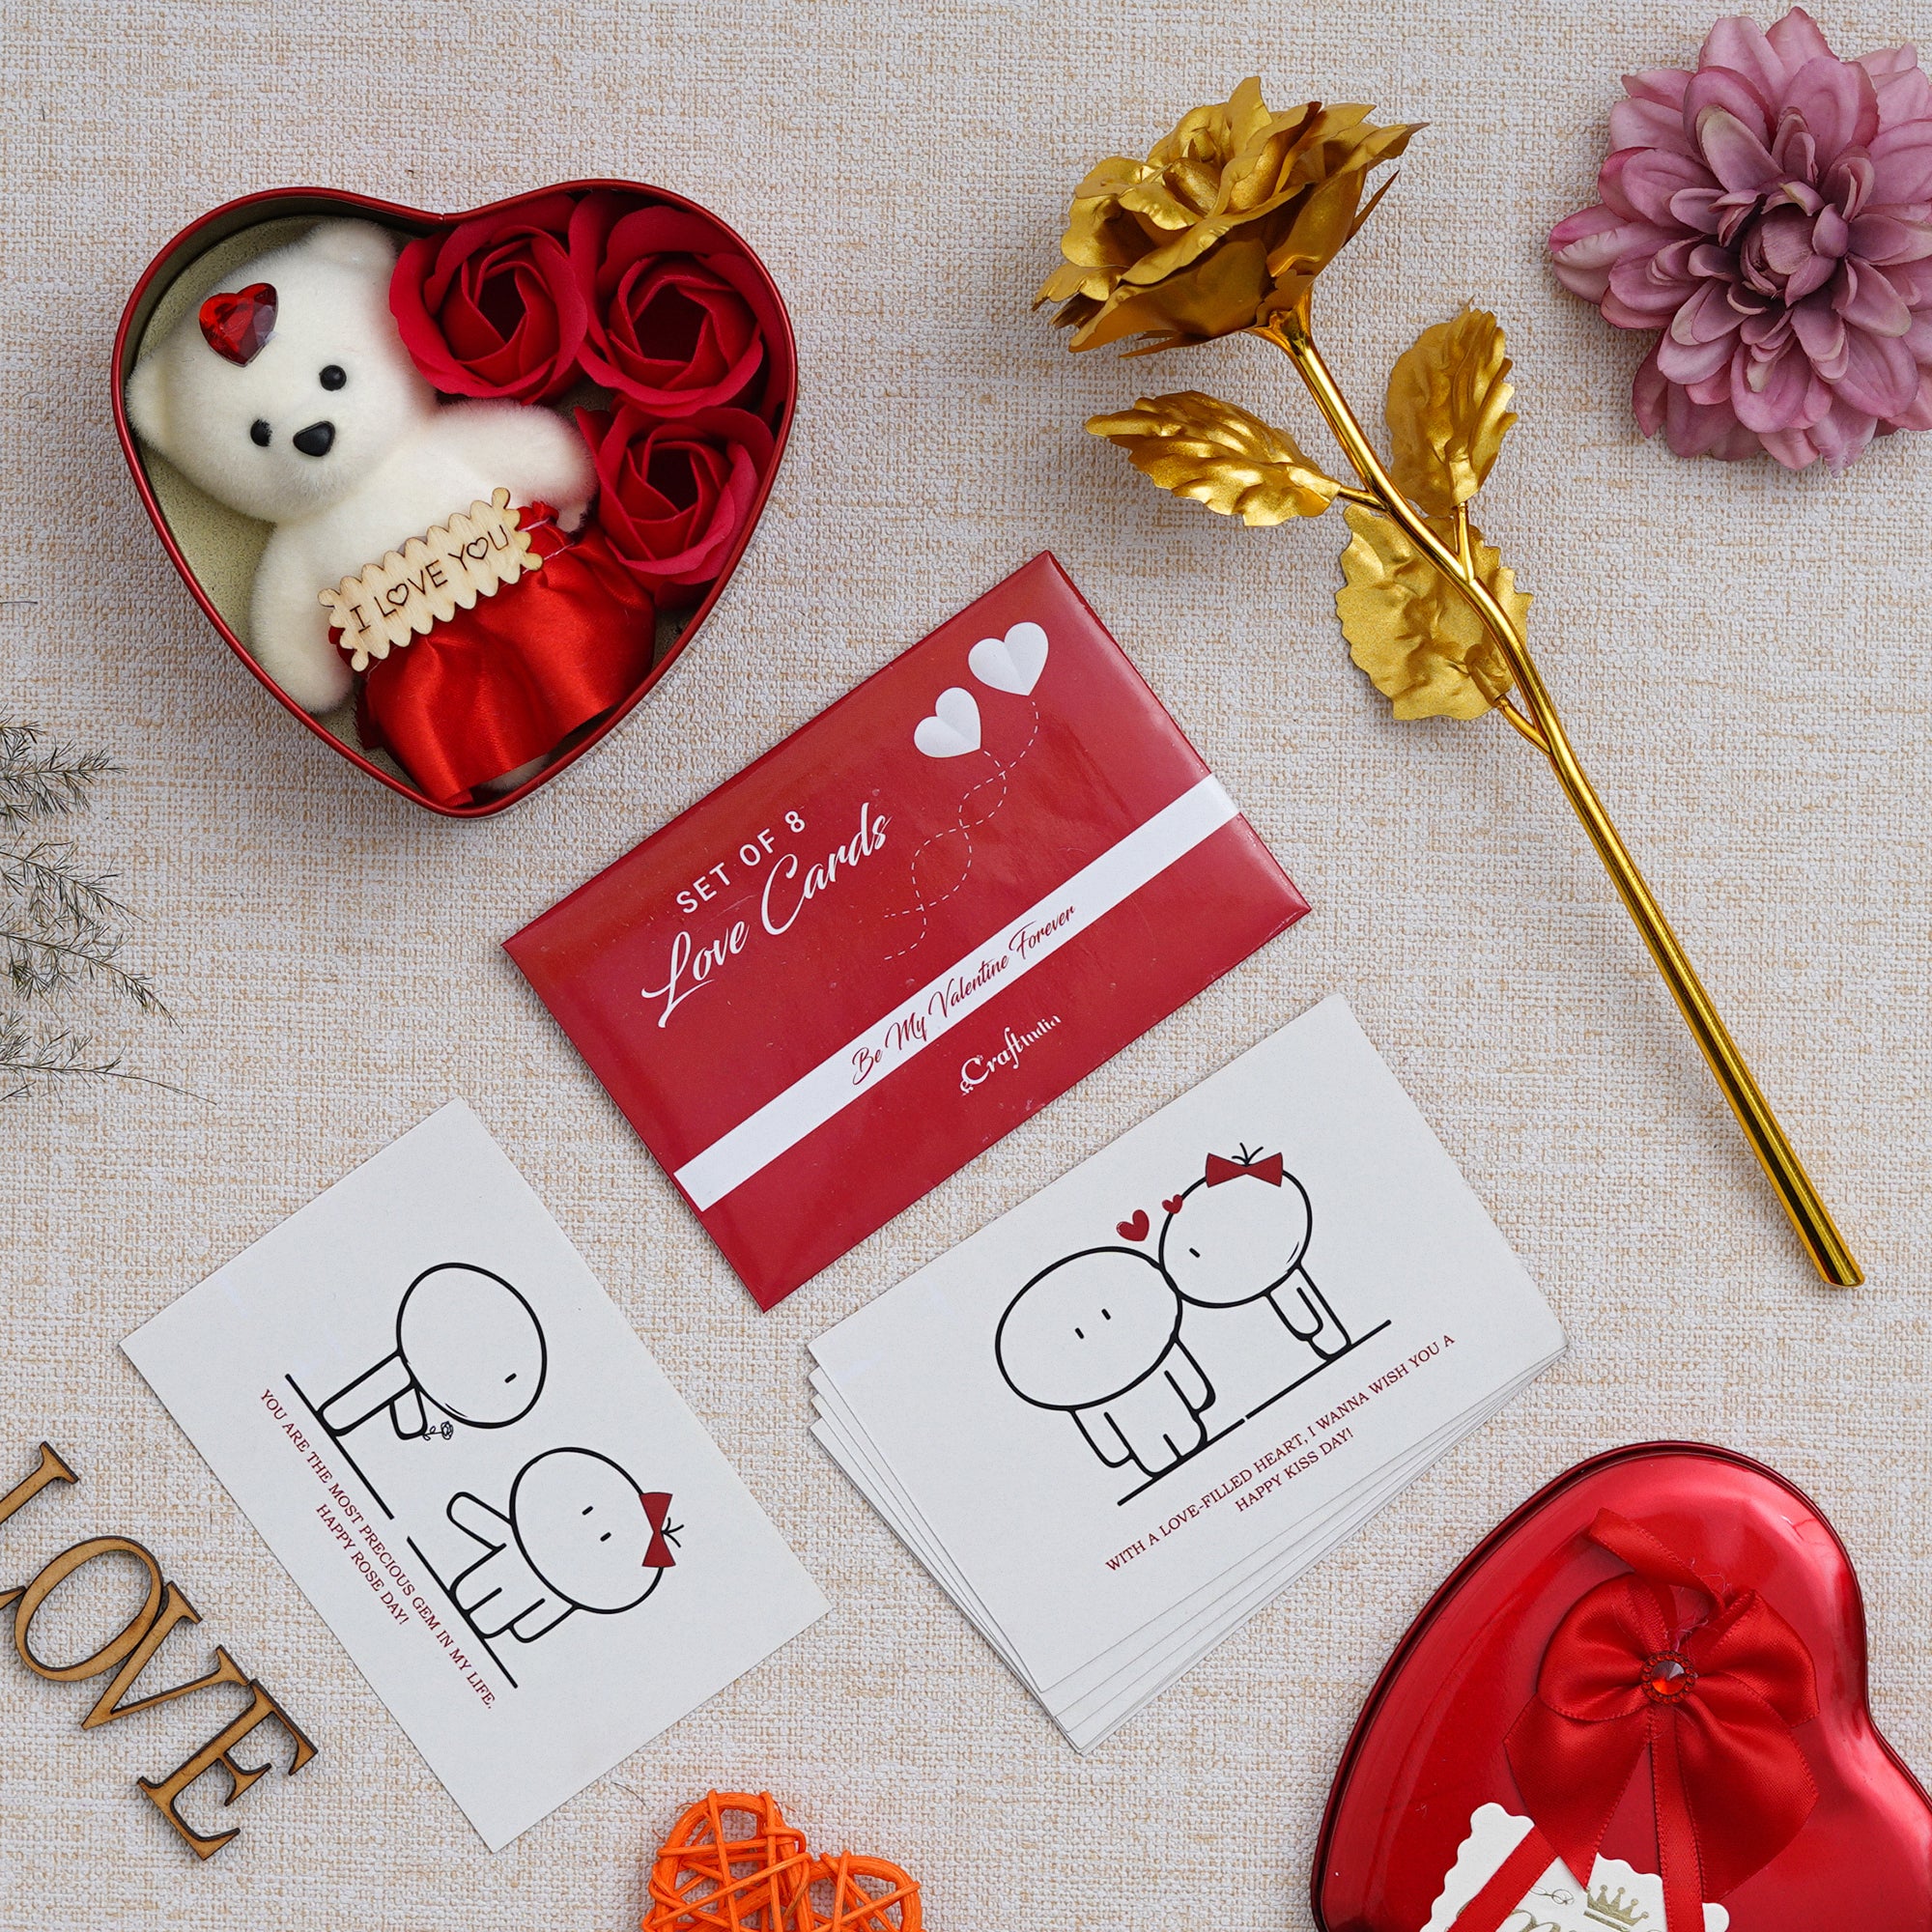 Valentine Combo of Set of 8 Love Post Cards Gift Cards Set, Golden Rose Gift Set, Heart Shaped Gift Box Set with White Teddy and Red Roses